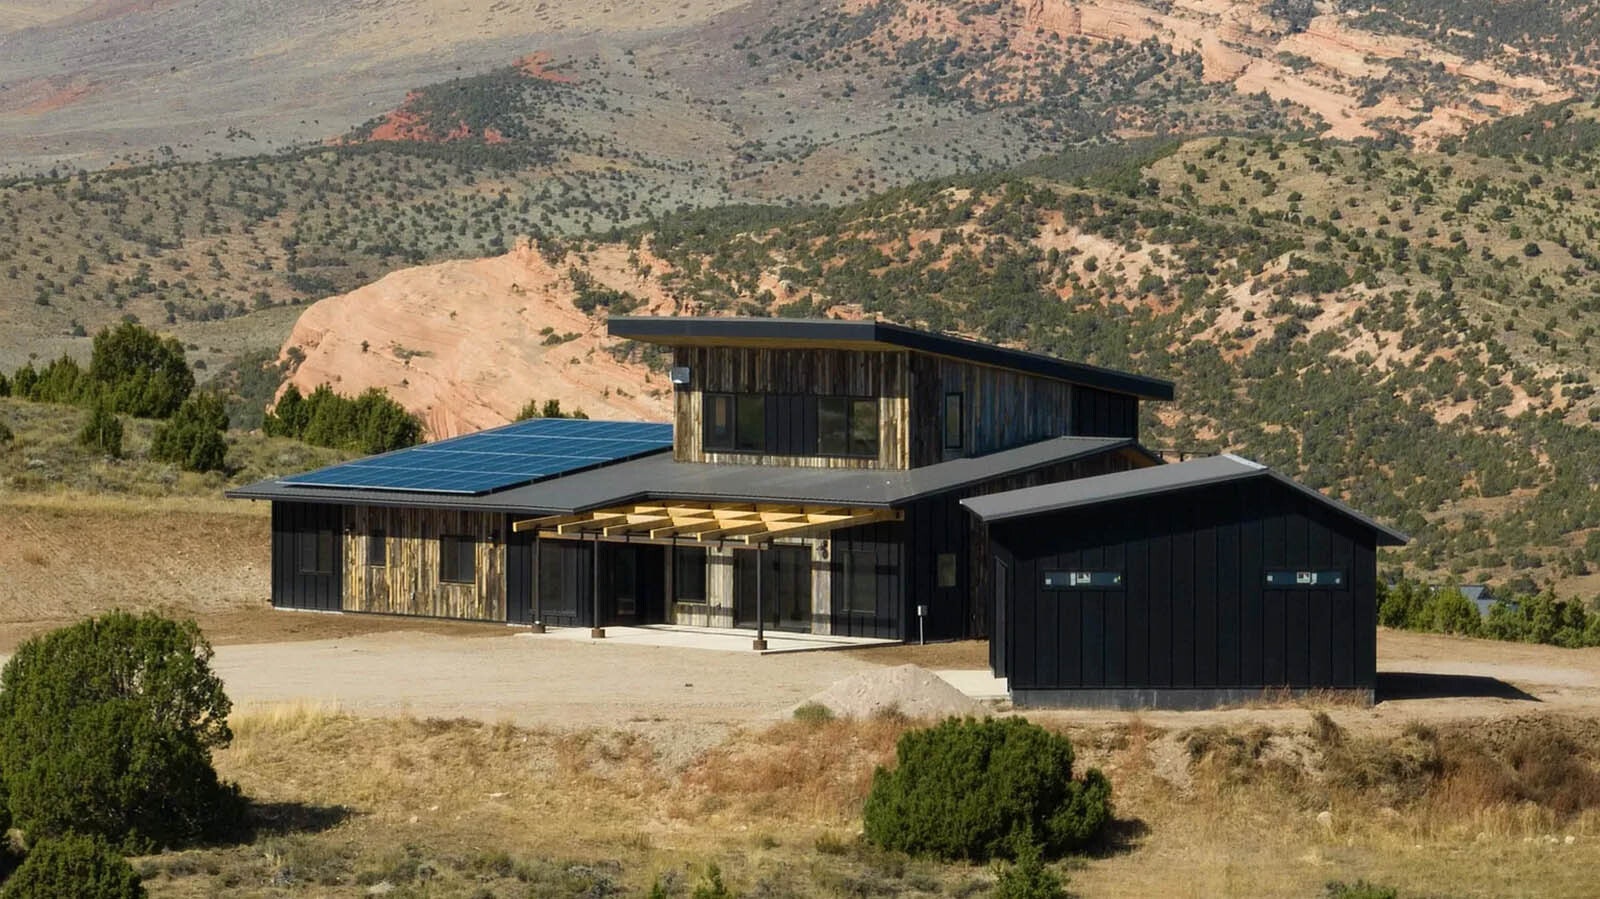 The net zero home near Lander has a spacious house and separate garage.